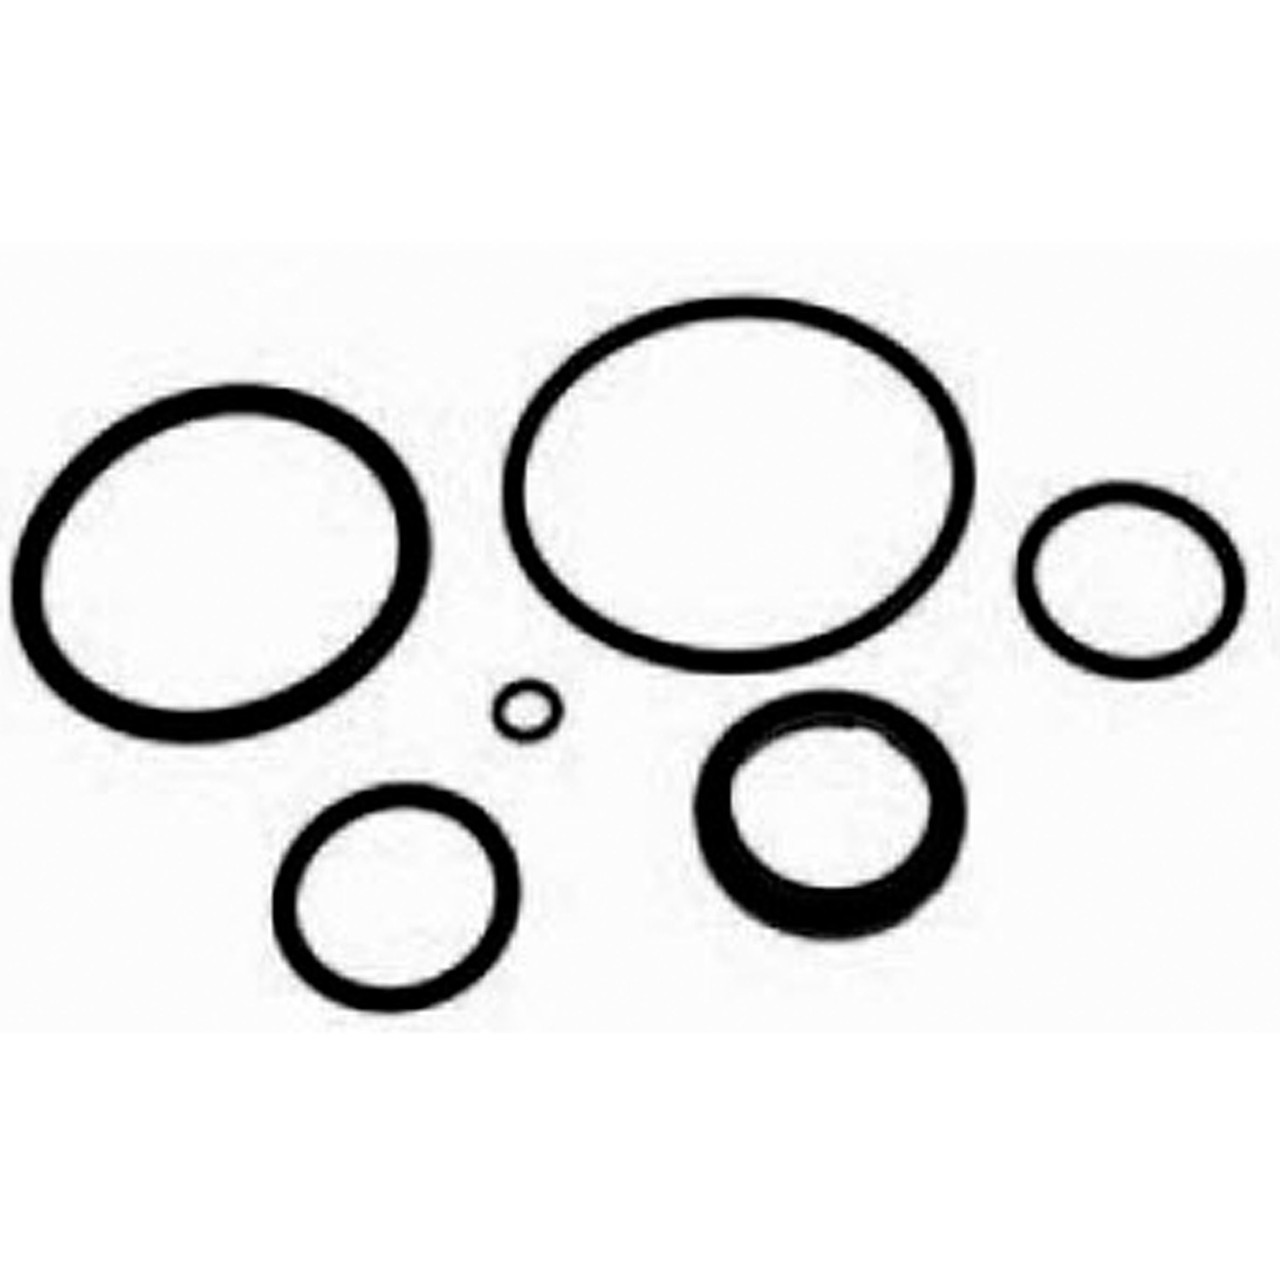 Johnson/Evinrude/OMC New OEM O-RING PACKAGE 0174003, 174003